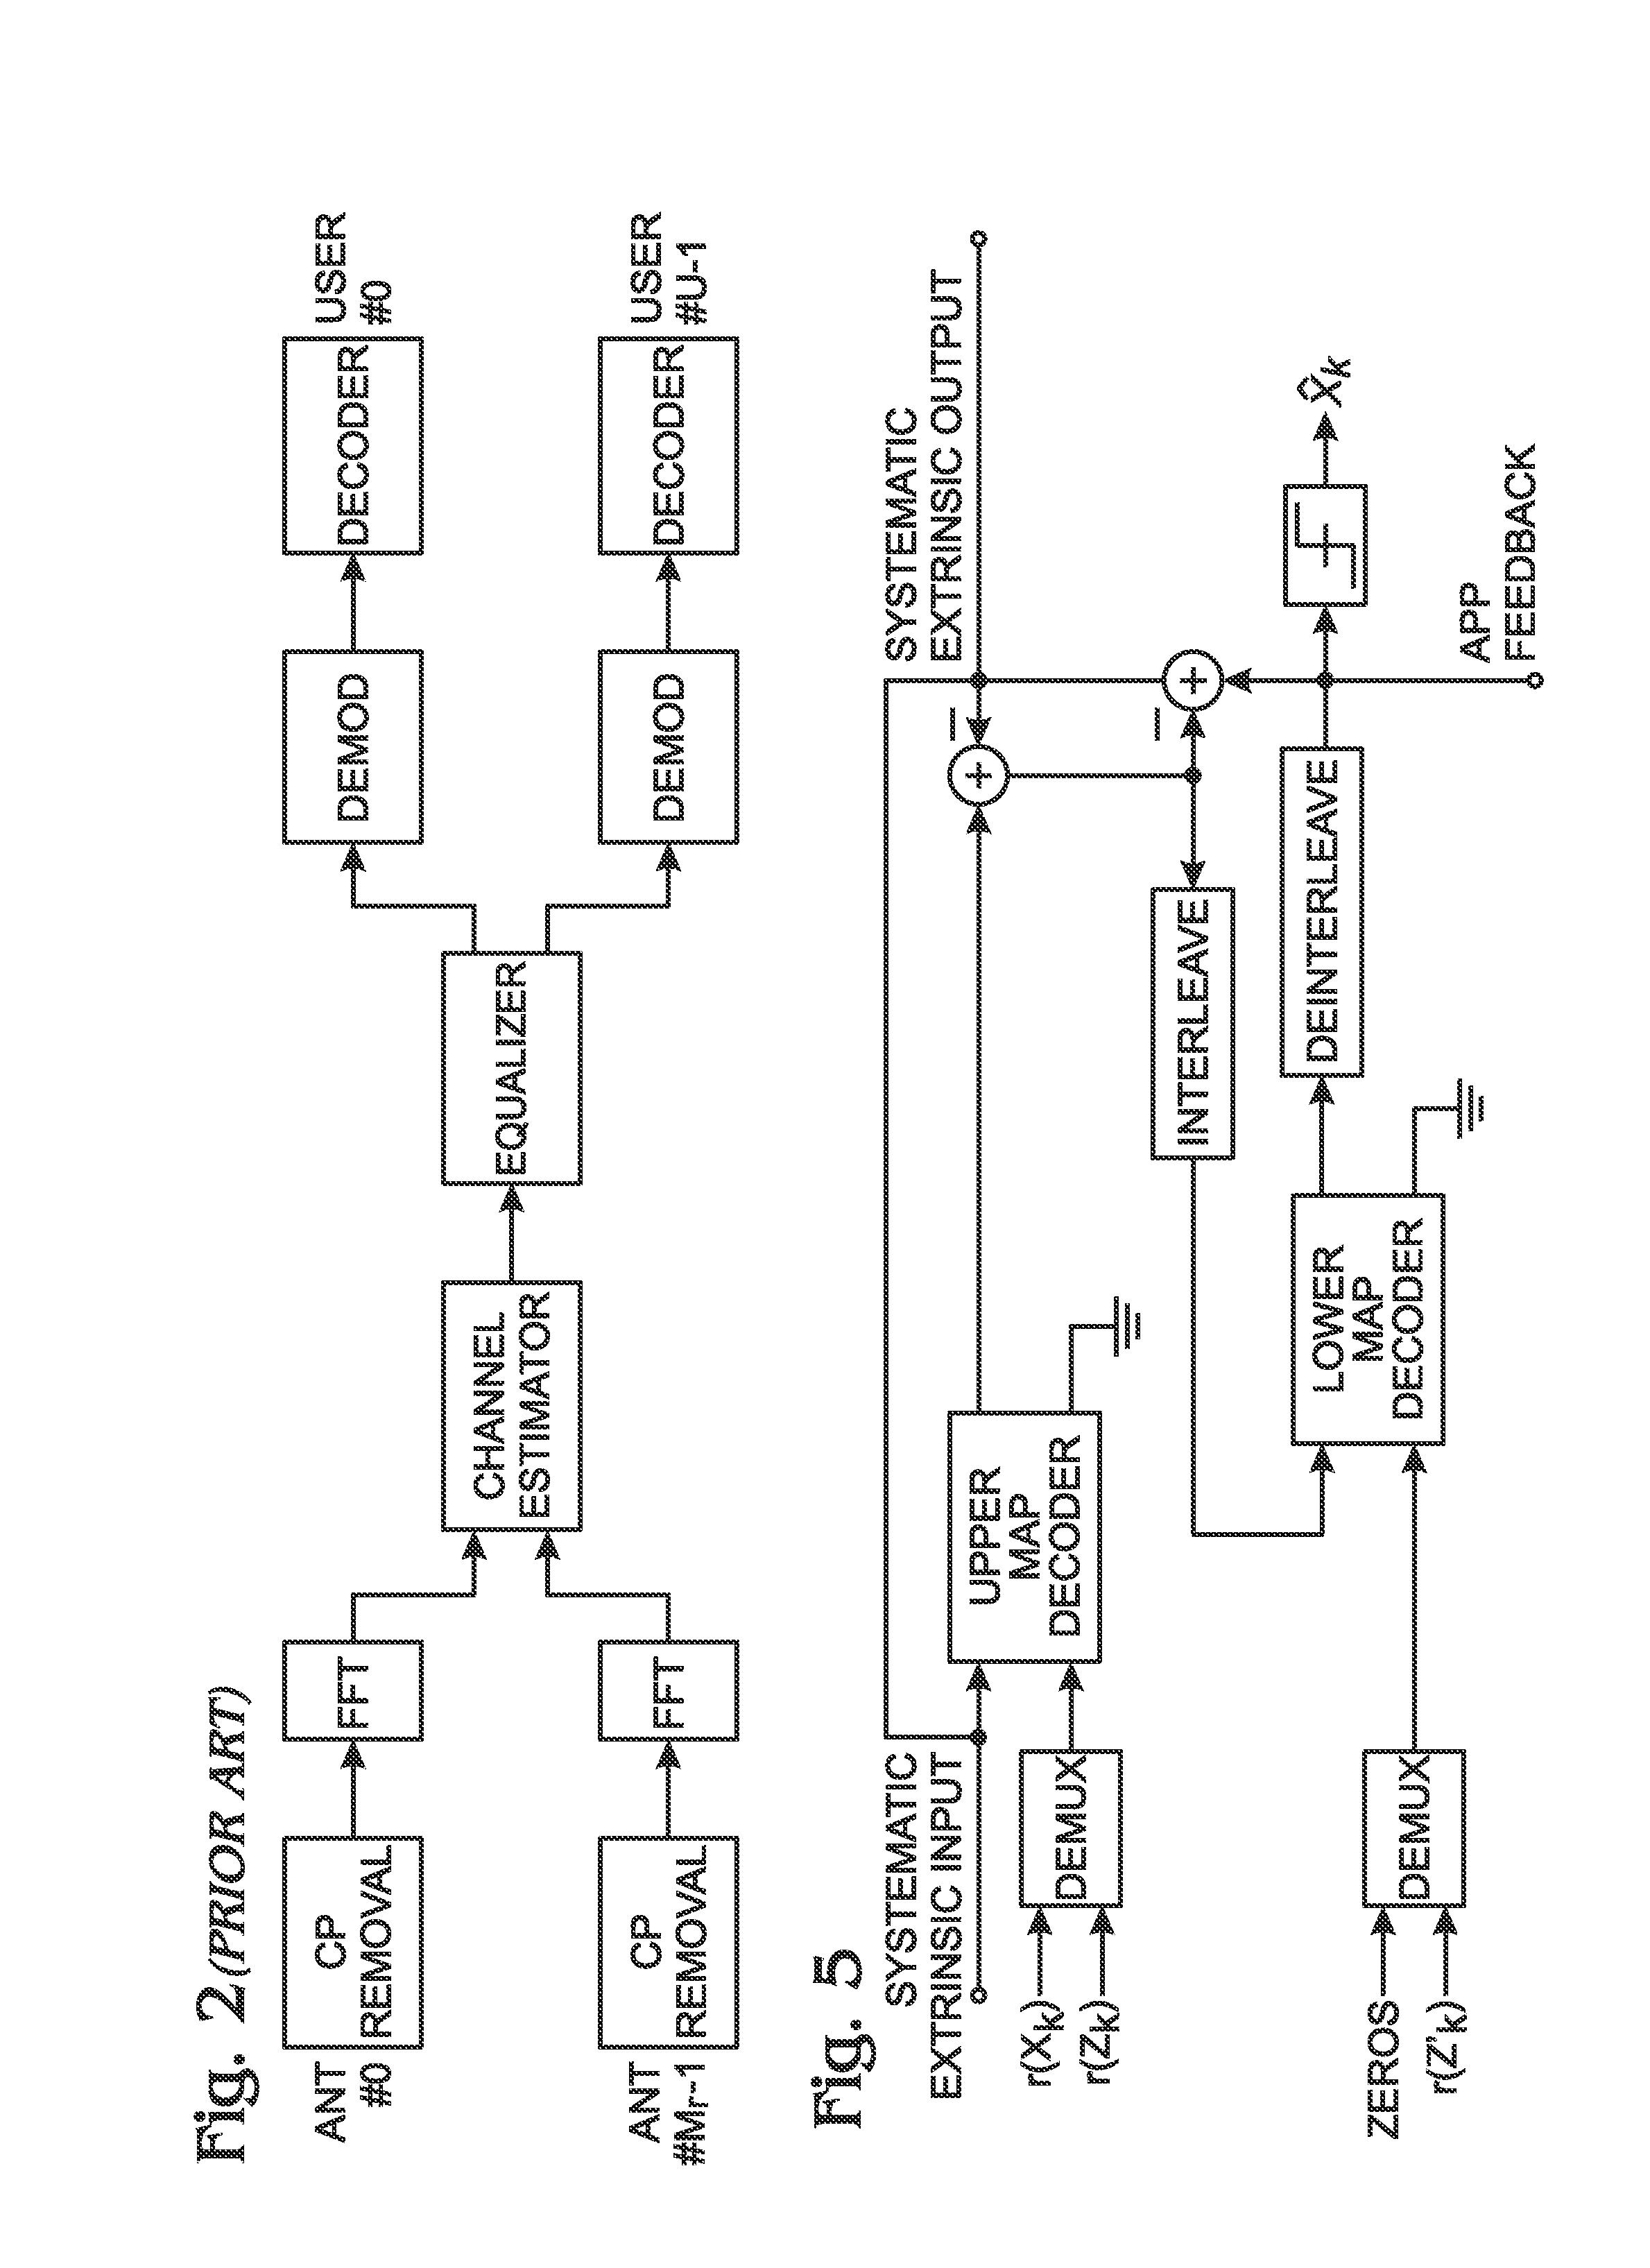 Uplink single carrier frequency division multiple access multiple-input multiple-output soft interference cancellation receiver